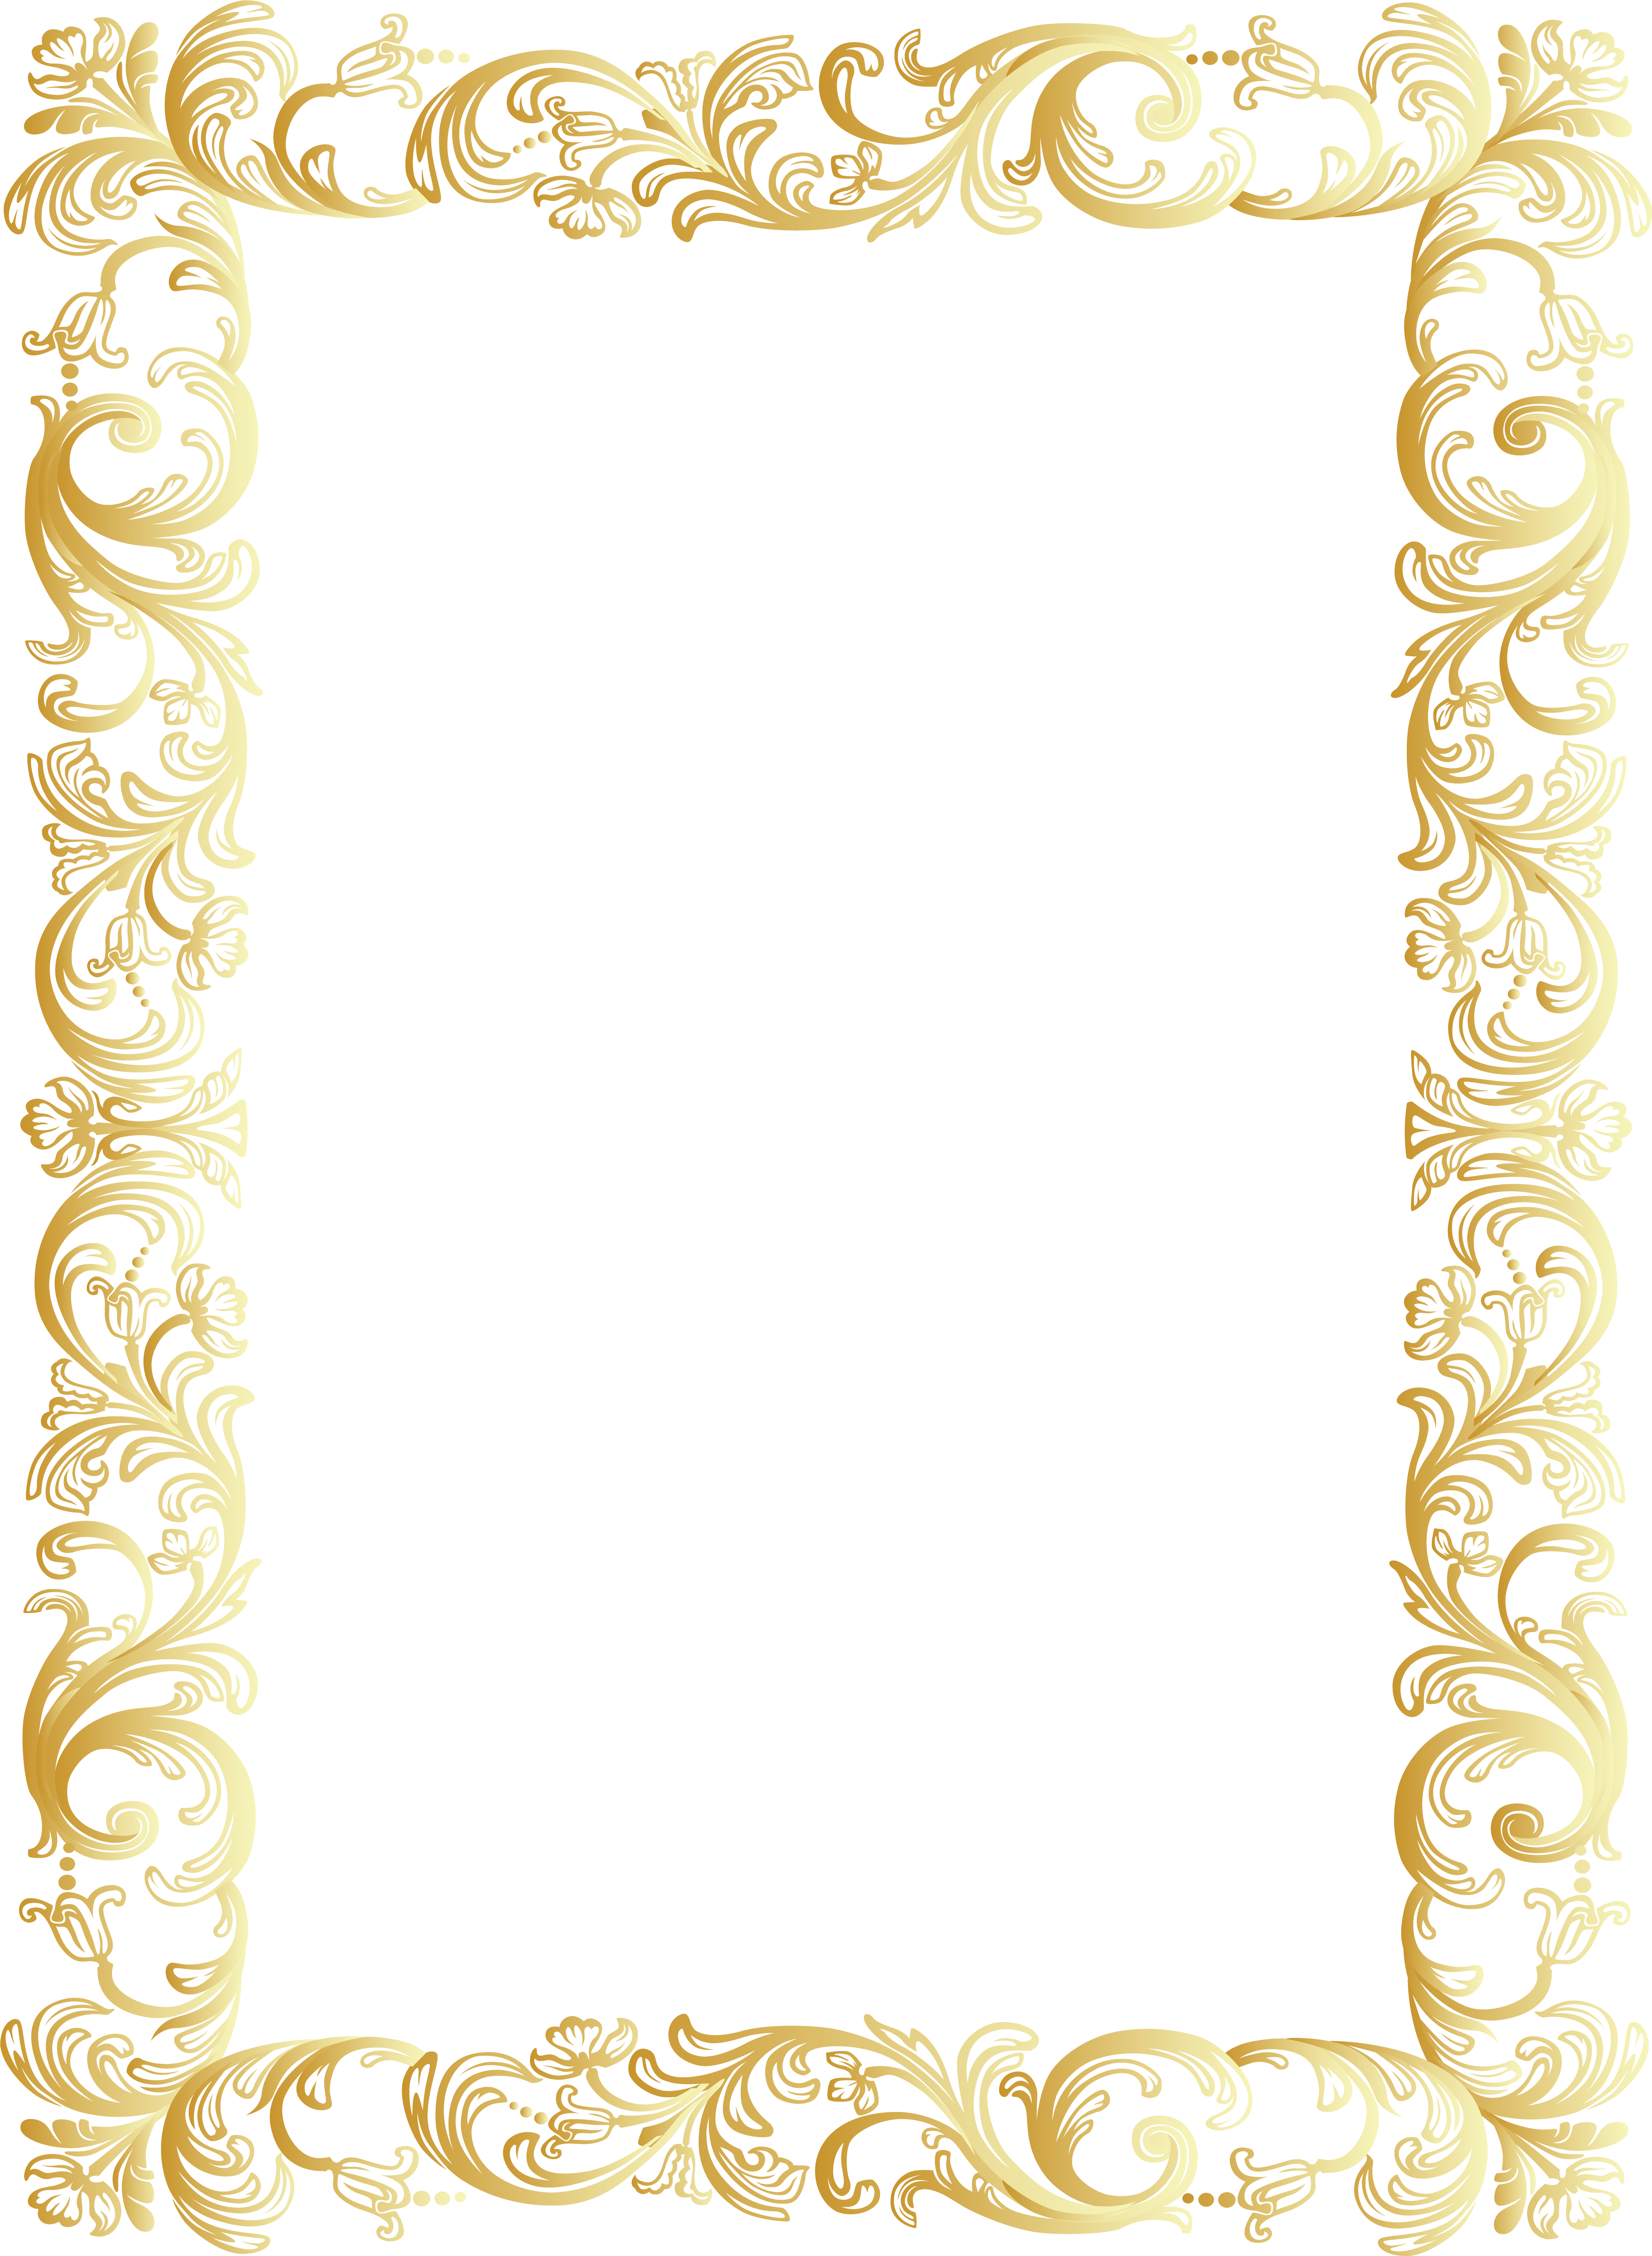 A Gold Floral Border On A Black Background